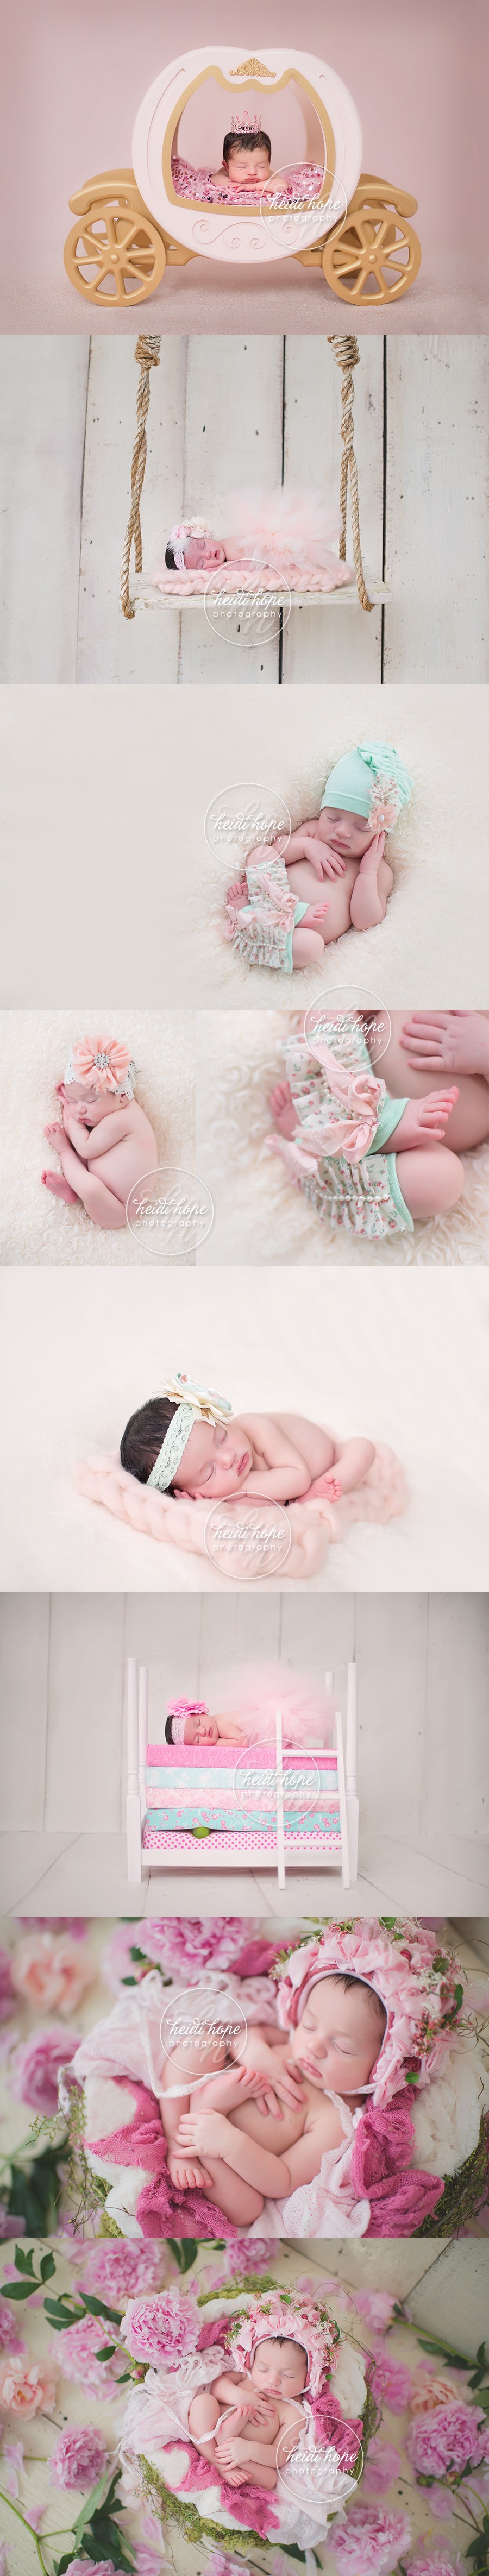 newborn baby girl and flowers princess carraige and sleeping on bed with pea web